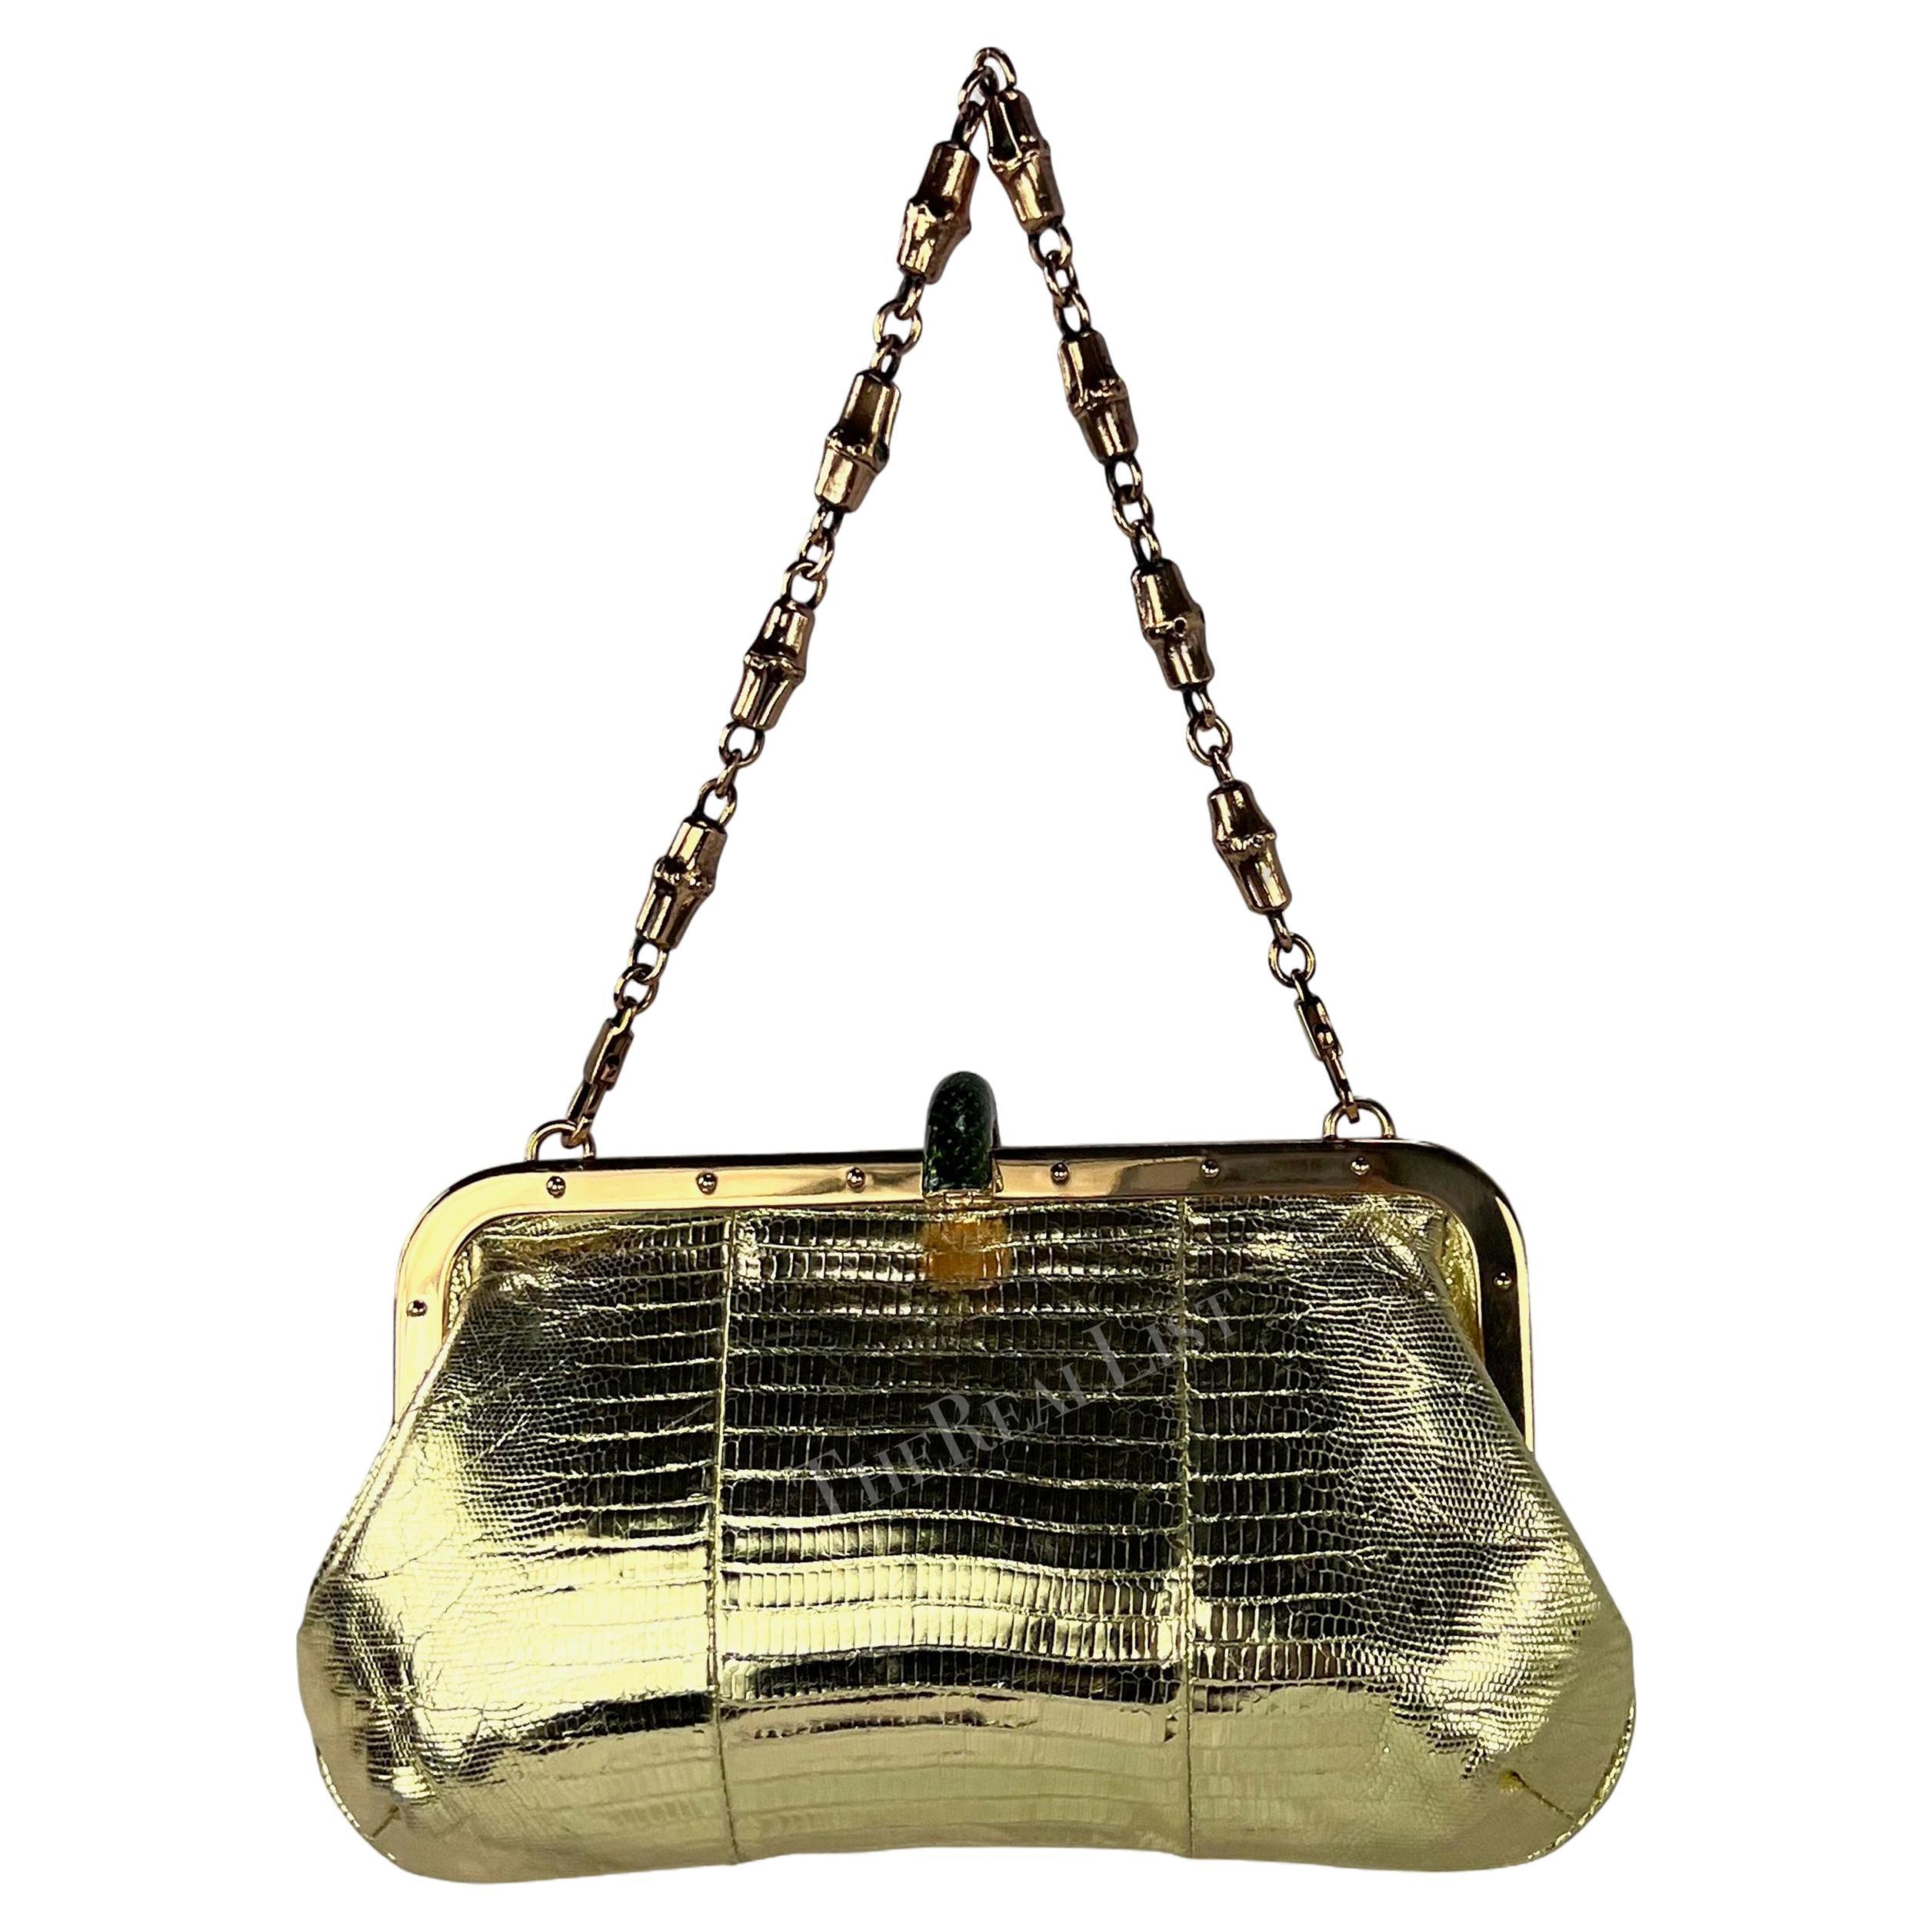 S/S 2004 Gucci by Tom Ford Runway Gold Lizard Skin Snake Convertible Bag  6